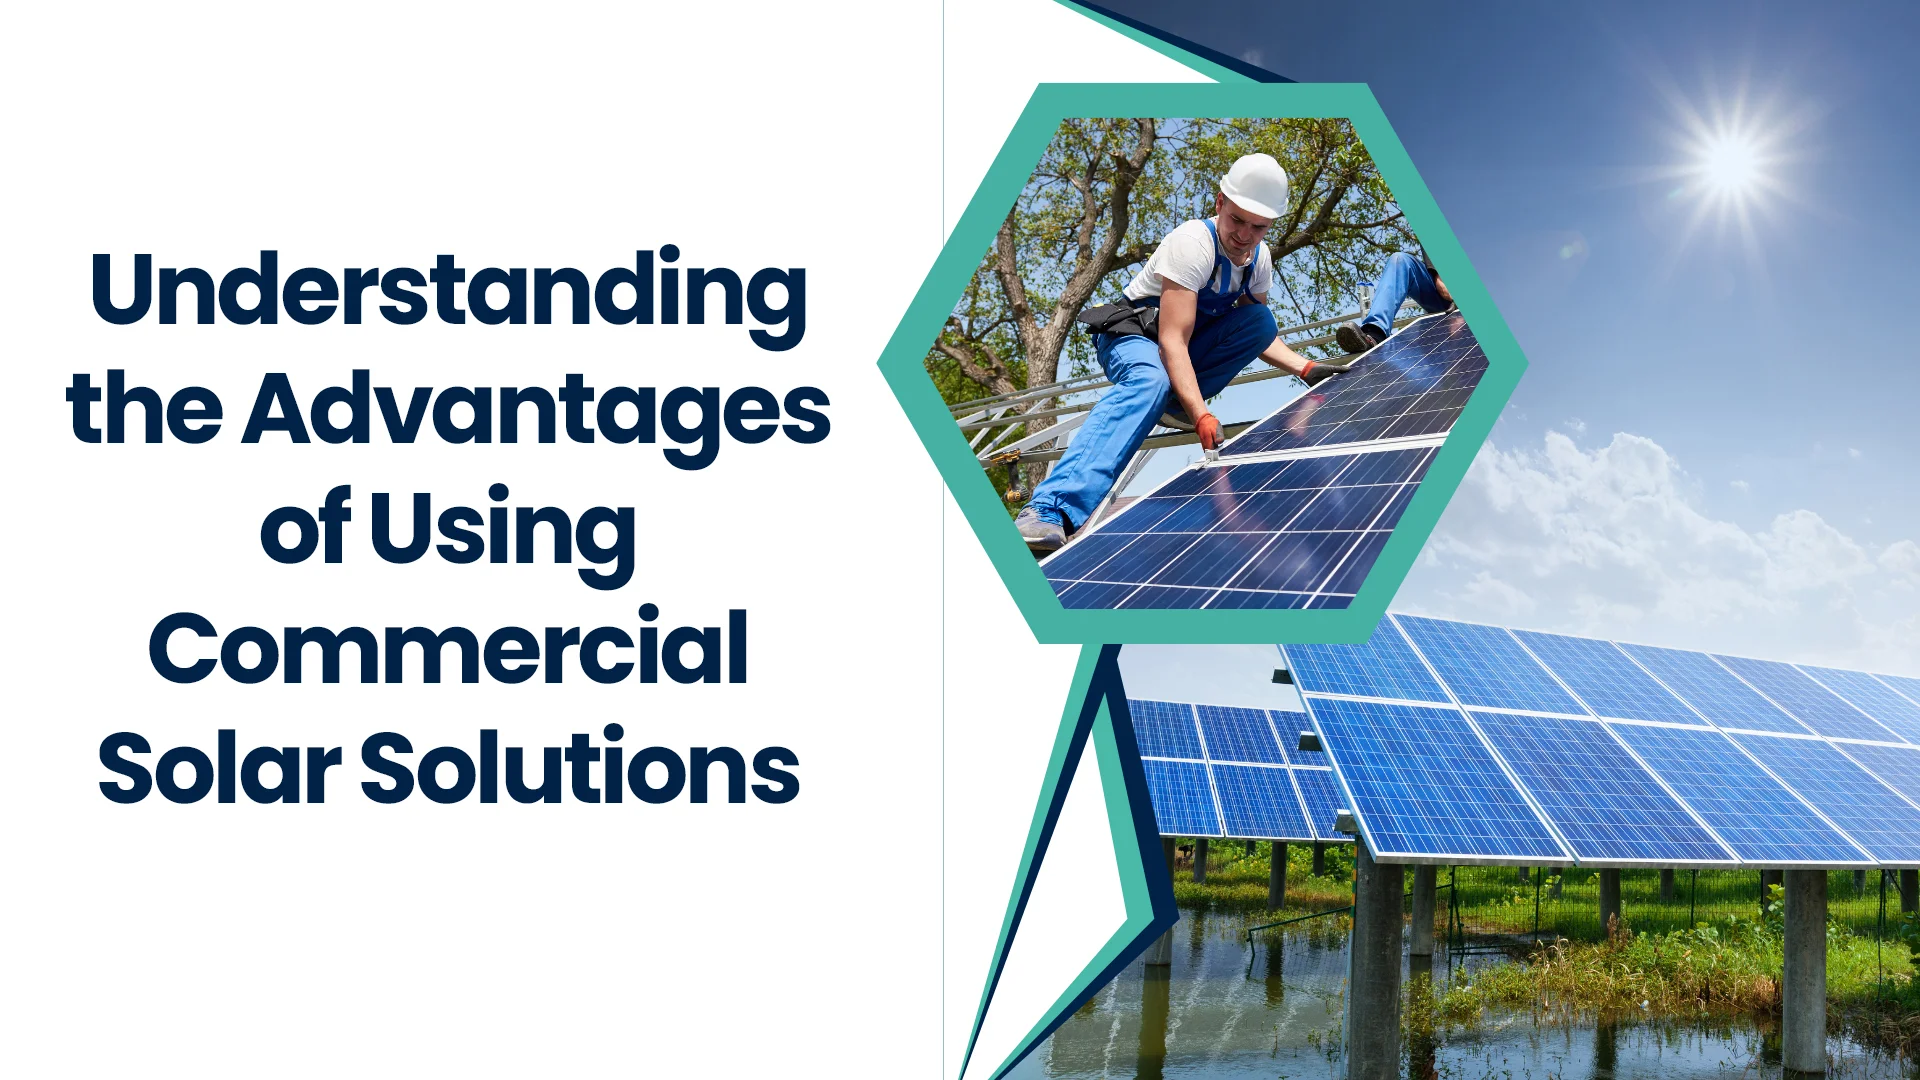 Understanding the Advantages of Using Commercial Solar Solutions